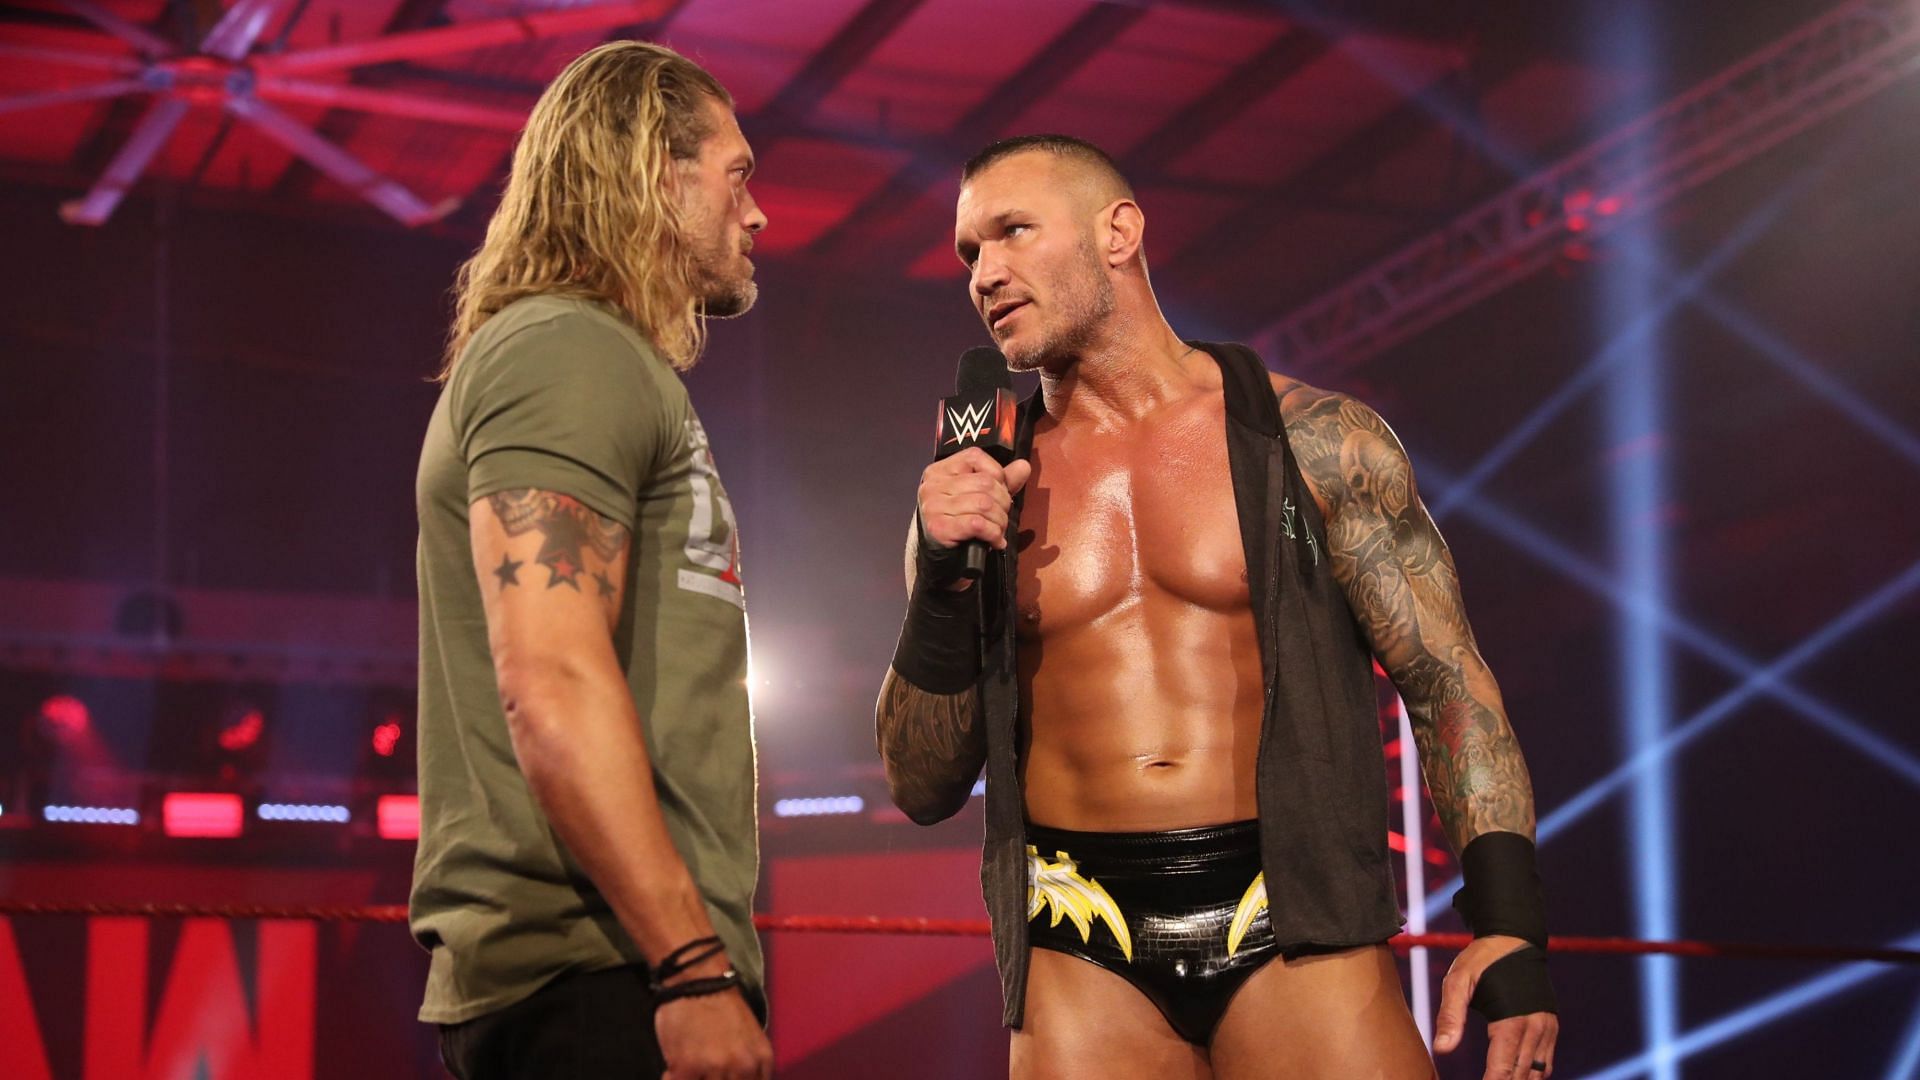 Randy Orton has been out of action since May